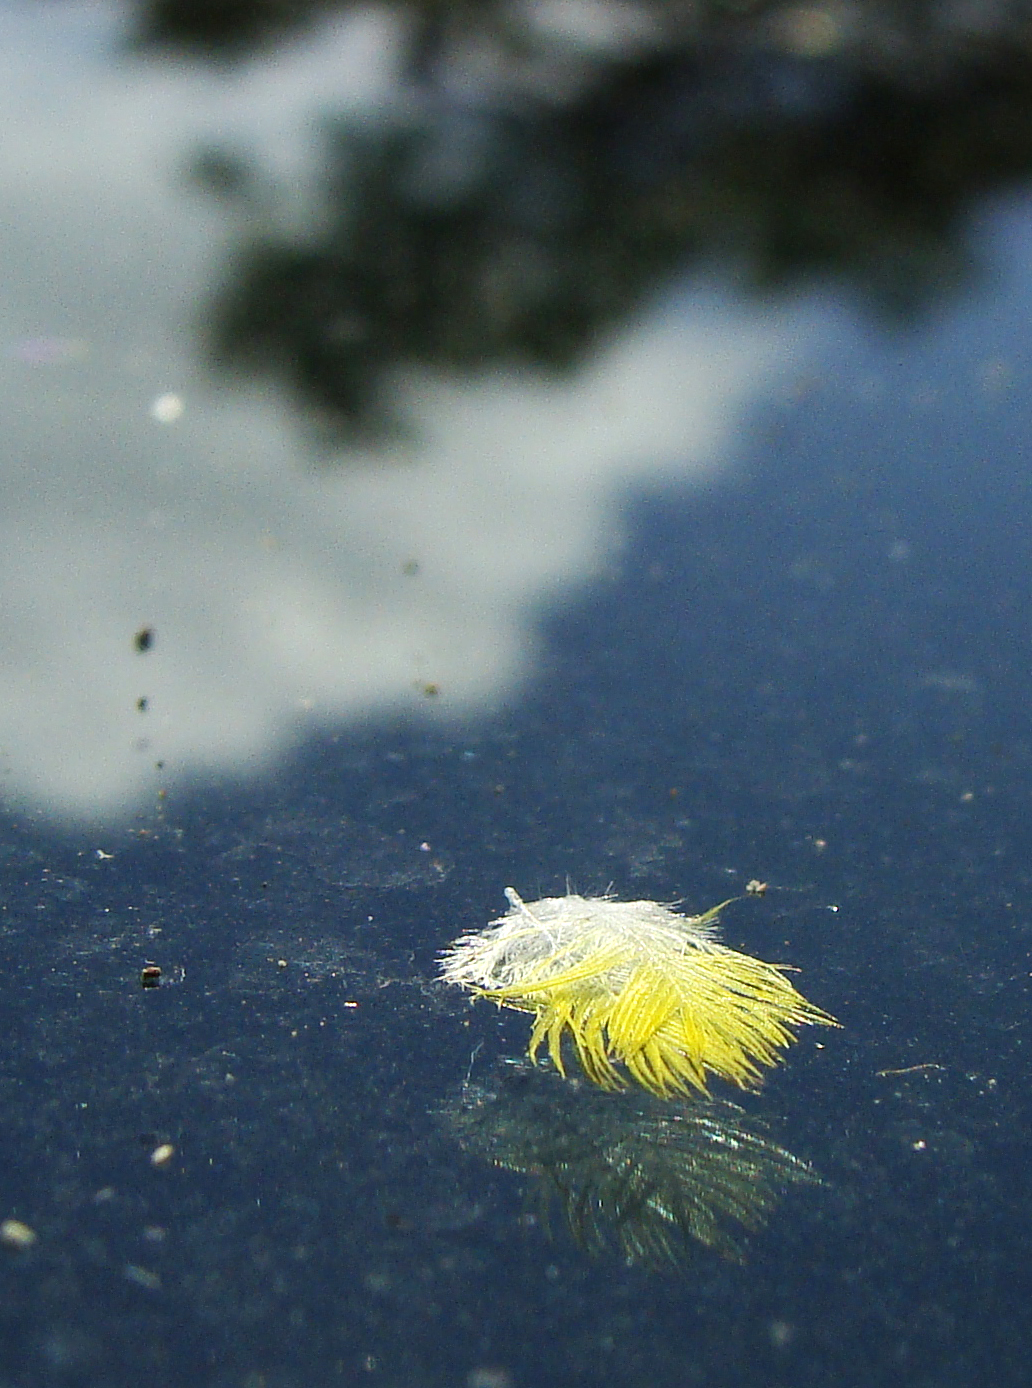 FILCHED FROM A FINCH? -- Goldfinch feathers on the windshield with trees and clouds reflected in the background.